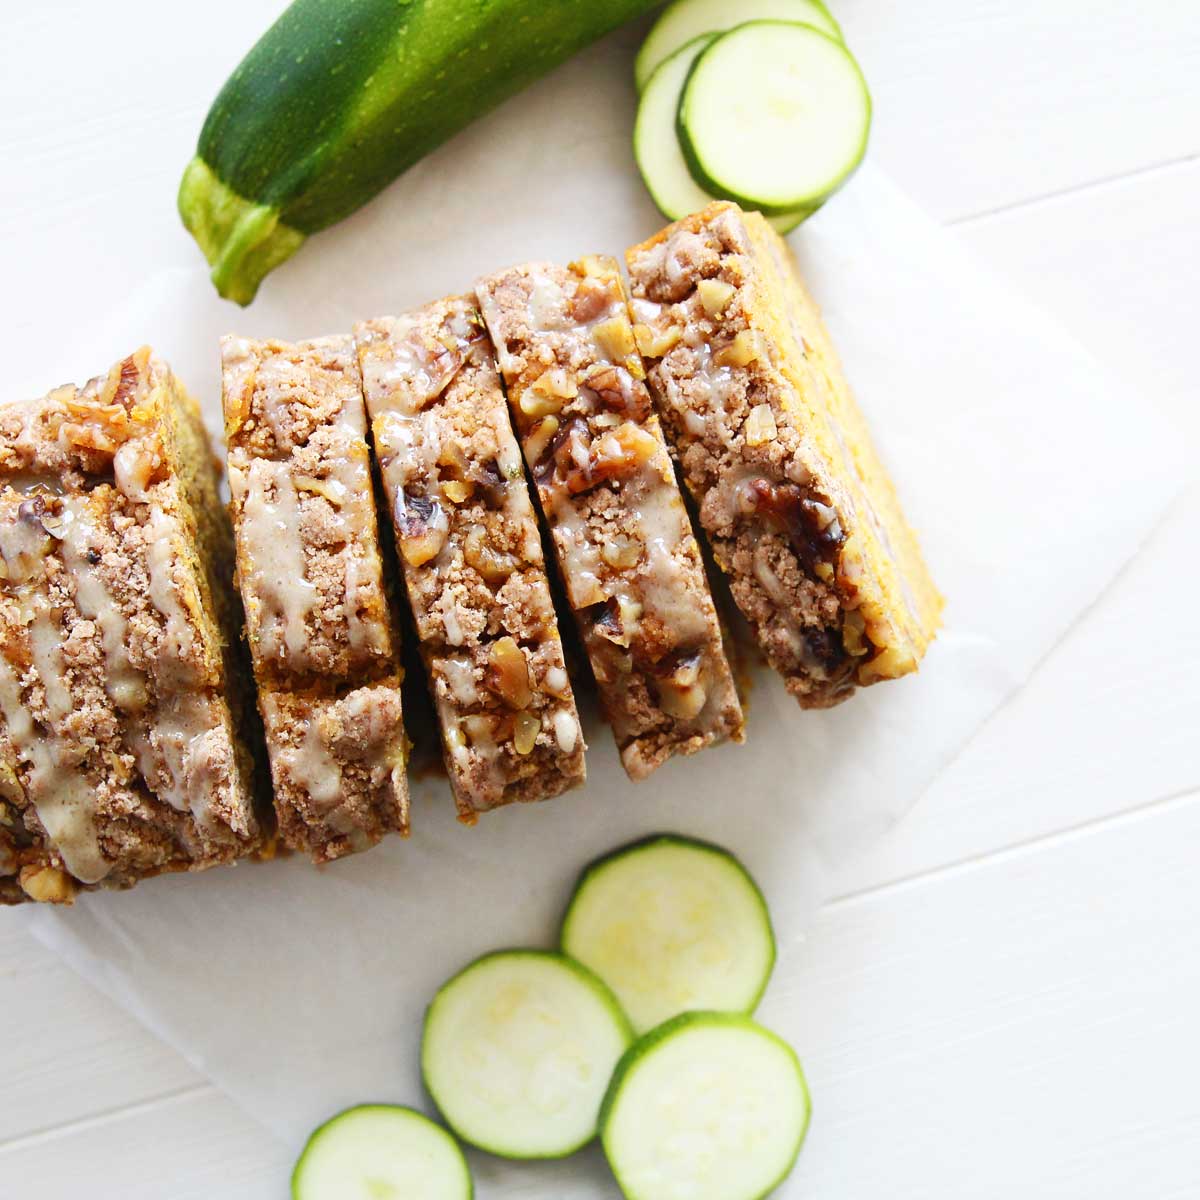 Zucchini Pumpkin Bread with Easy Walnut Streusel Topping (Vegan-Friendly!) - Canned Chickpea Yeast Bread